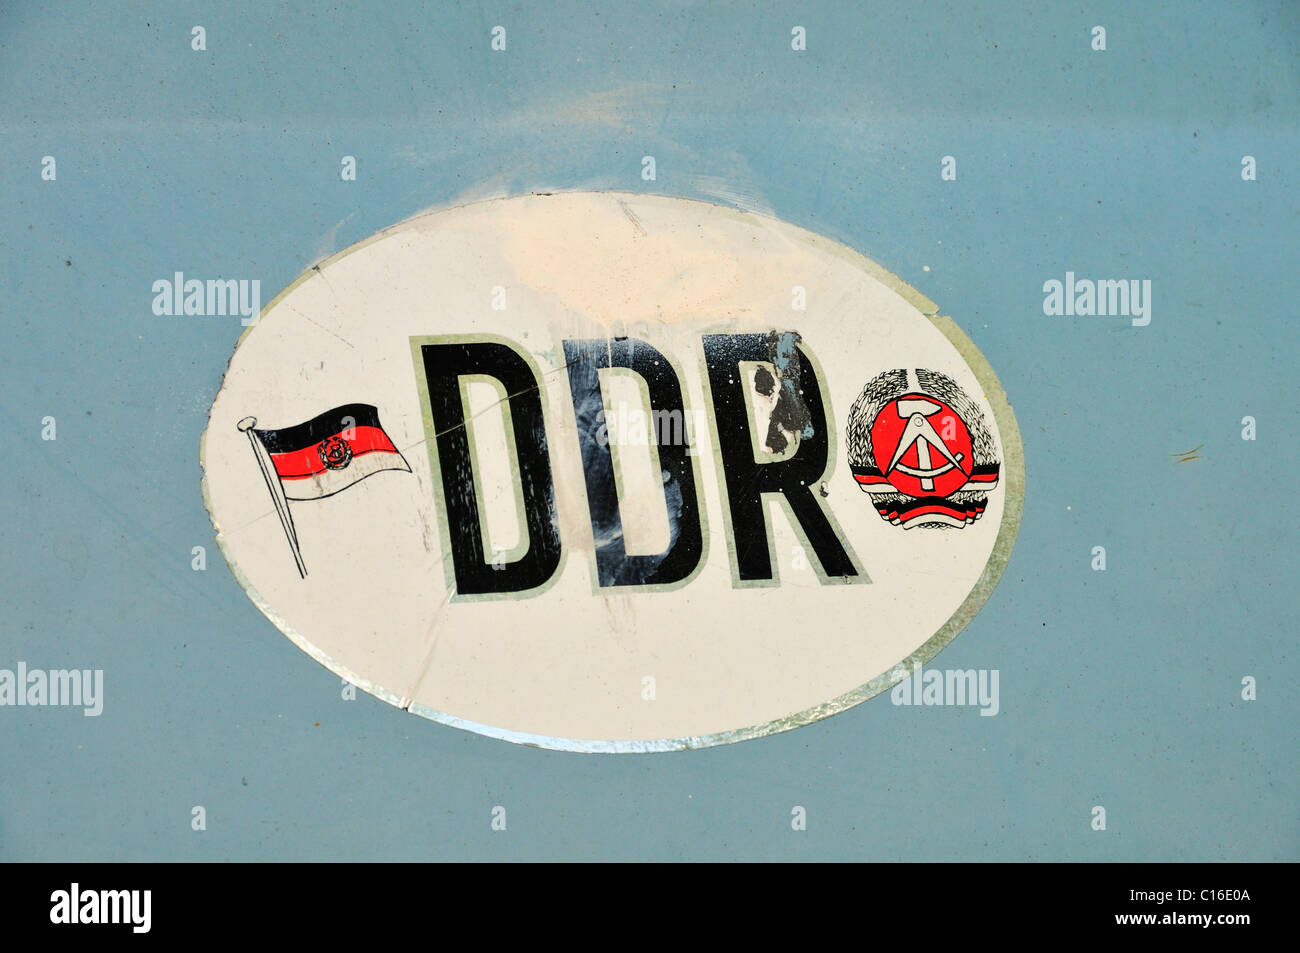 DDR sticker, old and faded Stock Photo